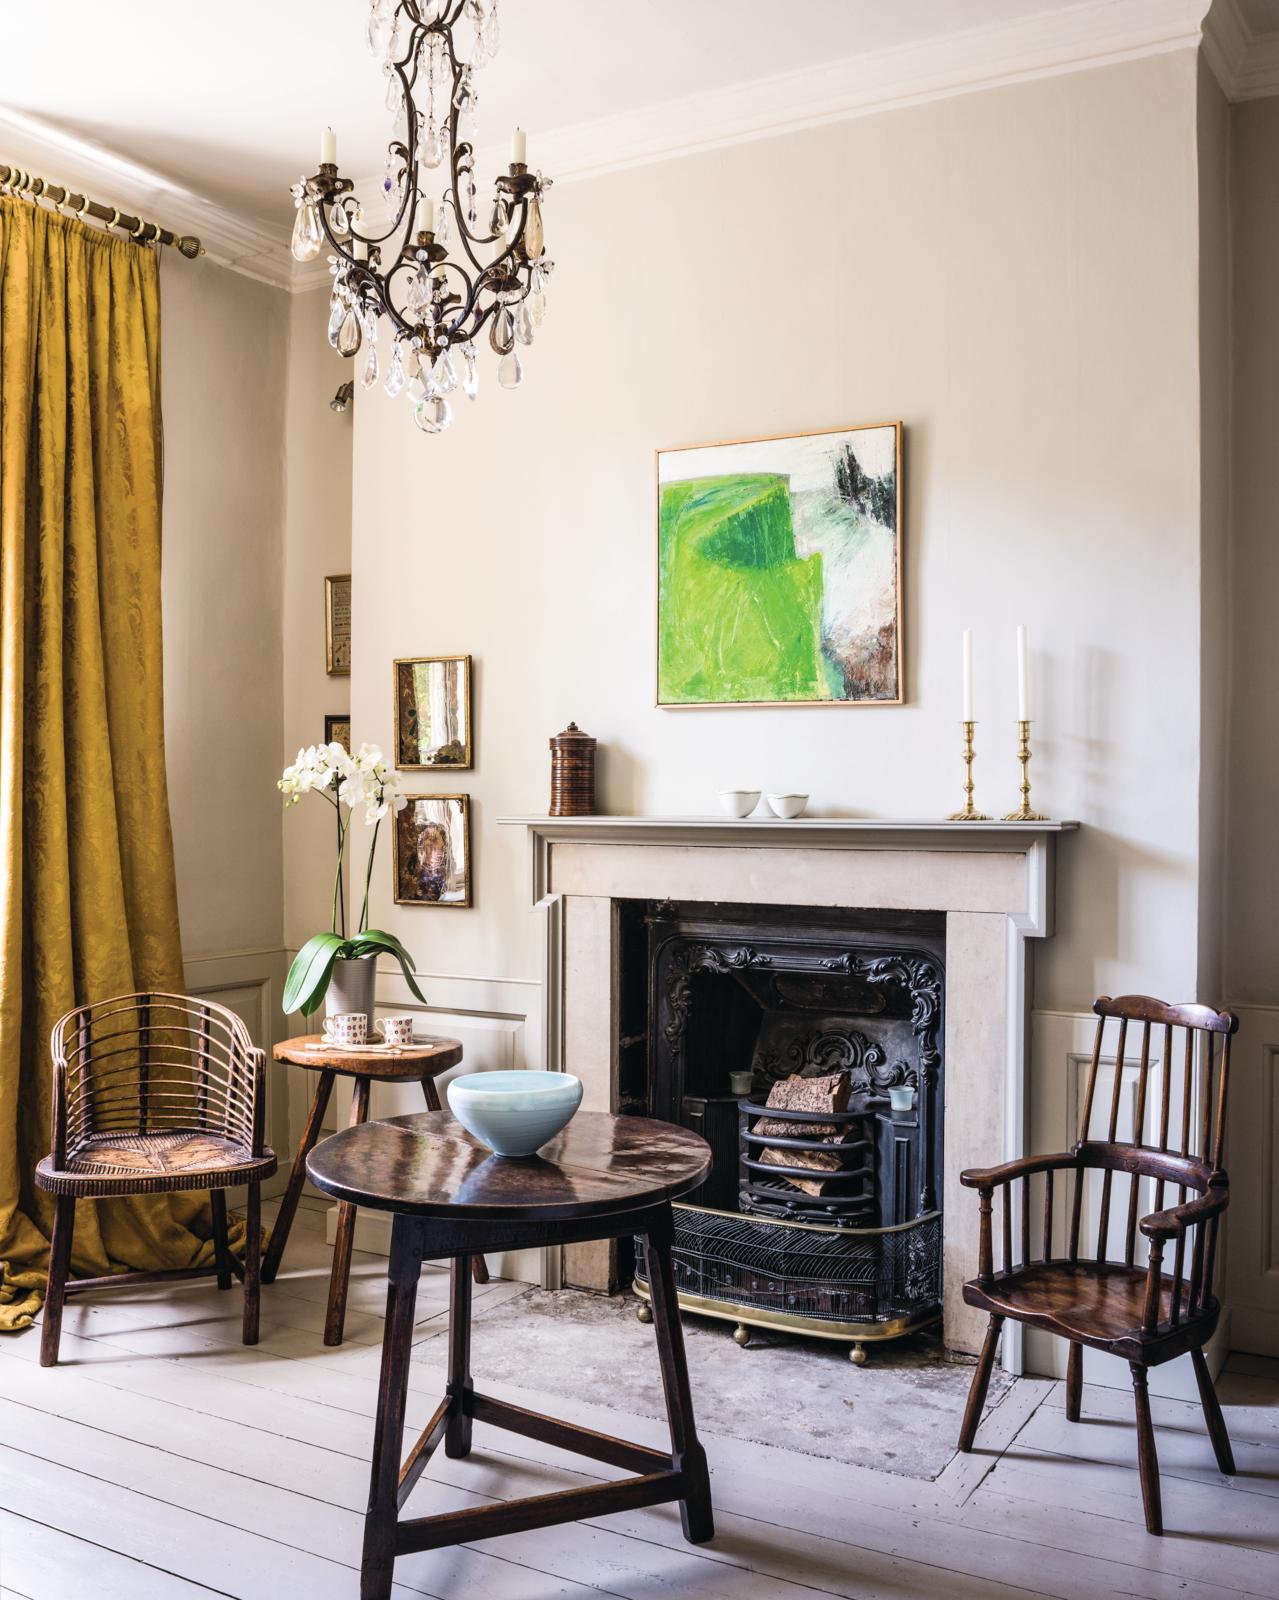 An 18th-century townhouse filled with antique country furniture - Homes ...